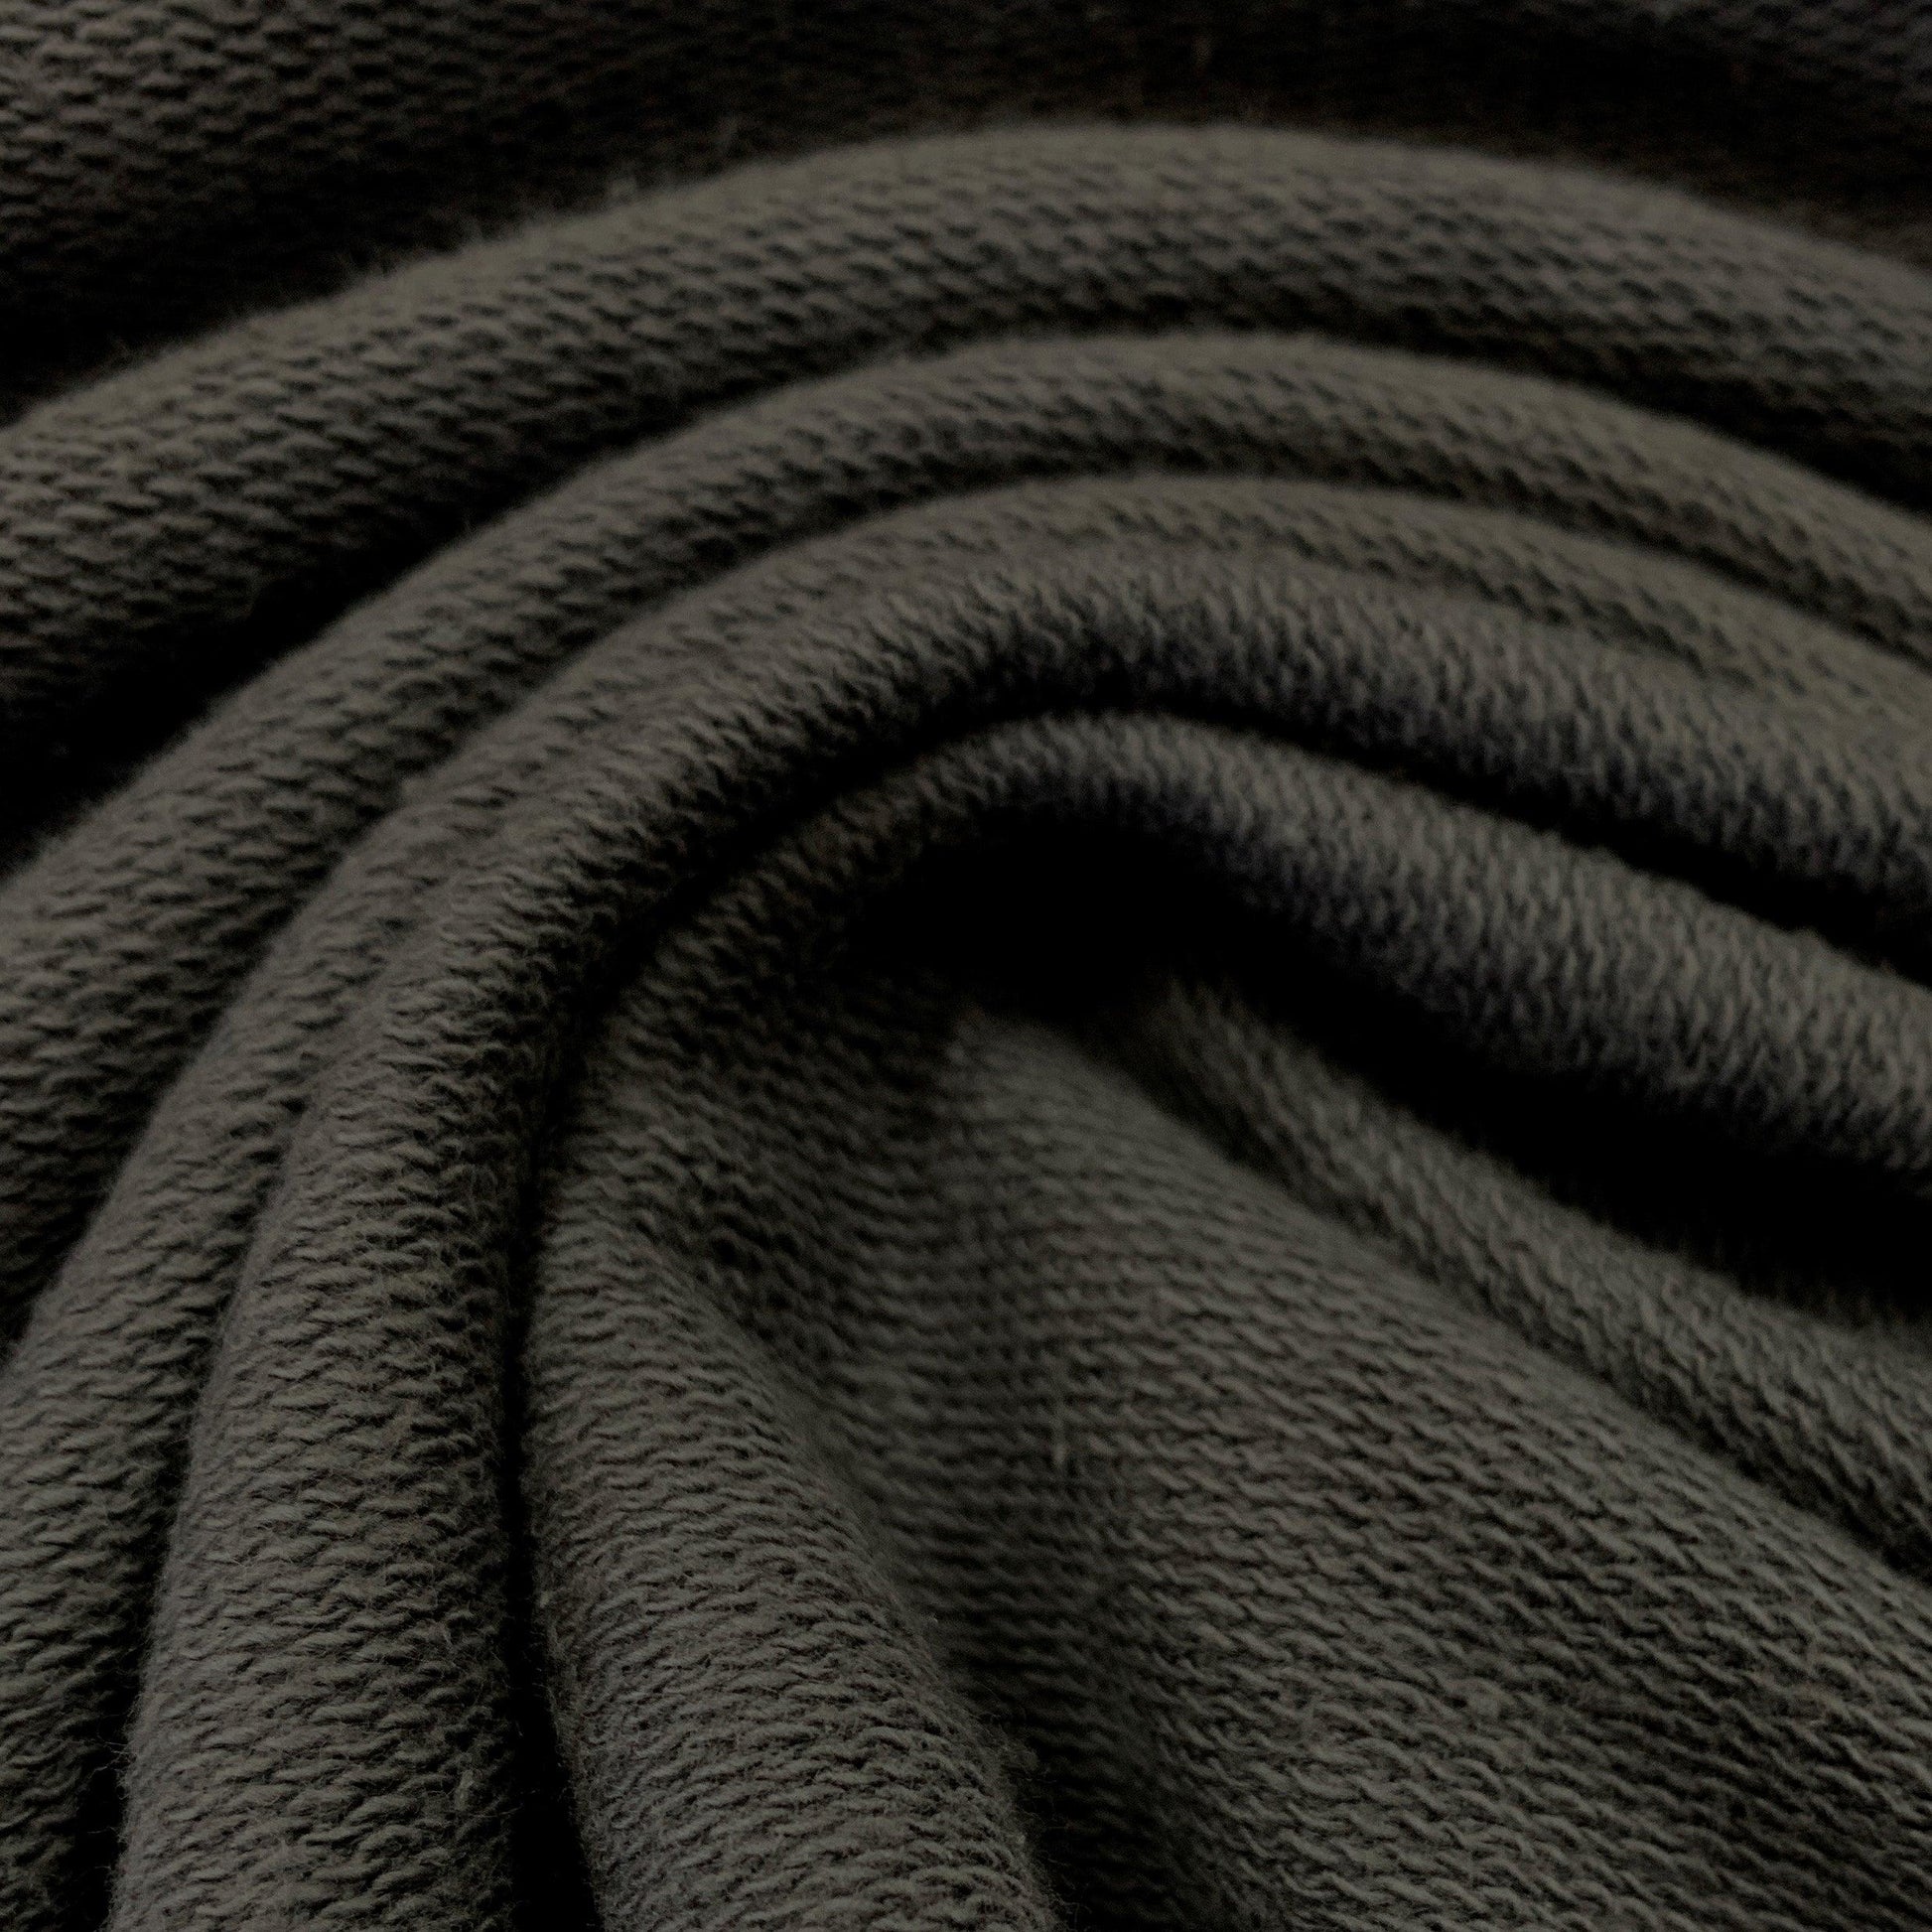 Graphite Medium Weight Organic Cotton French Terry Fabric - Grown in the USA